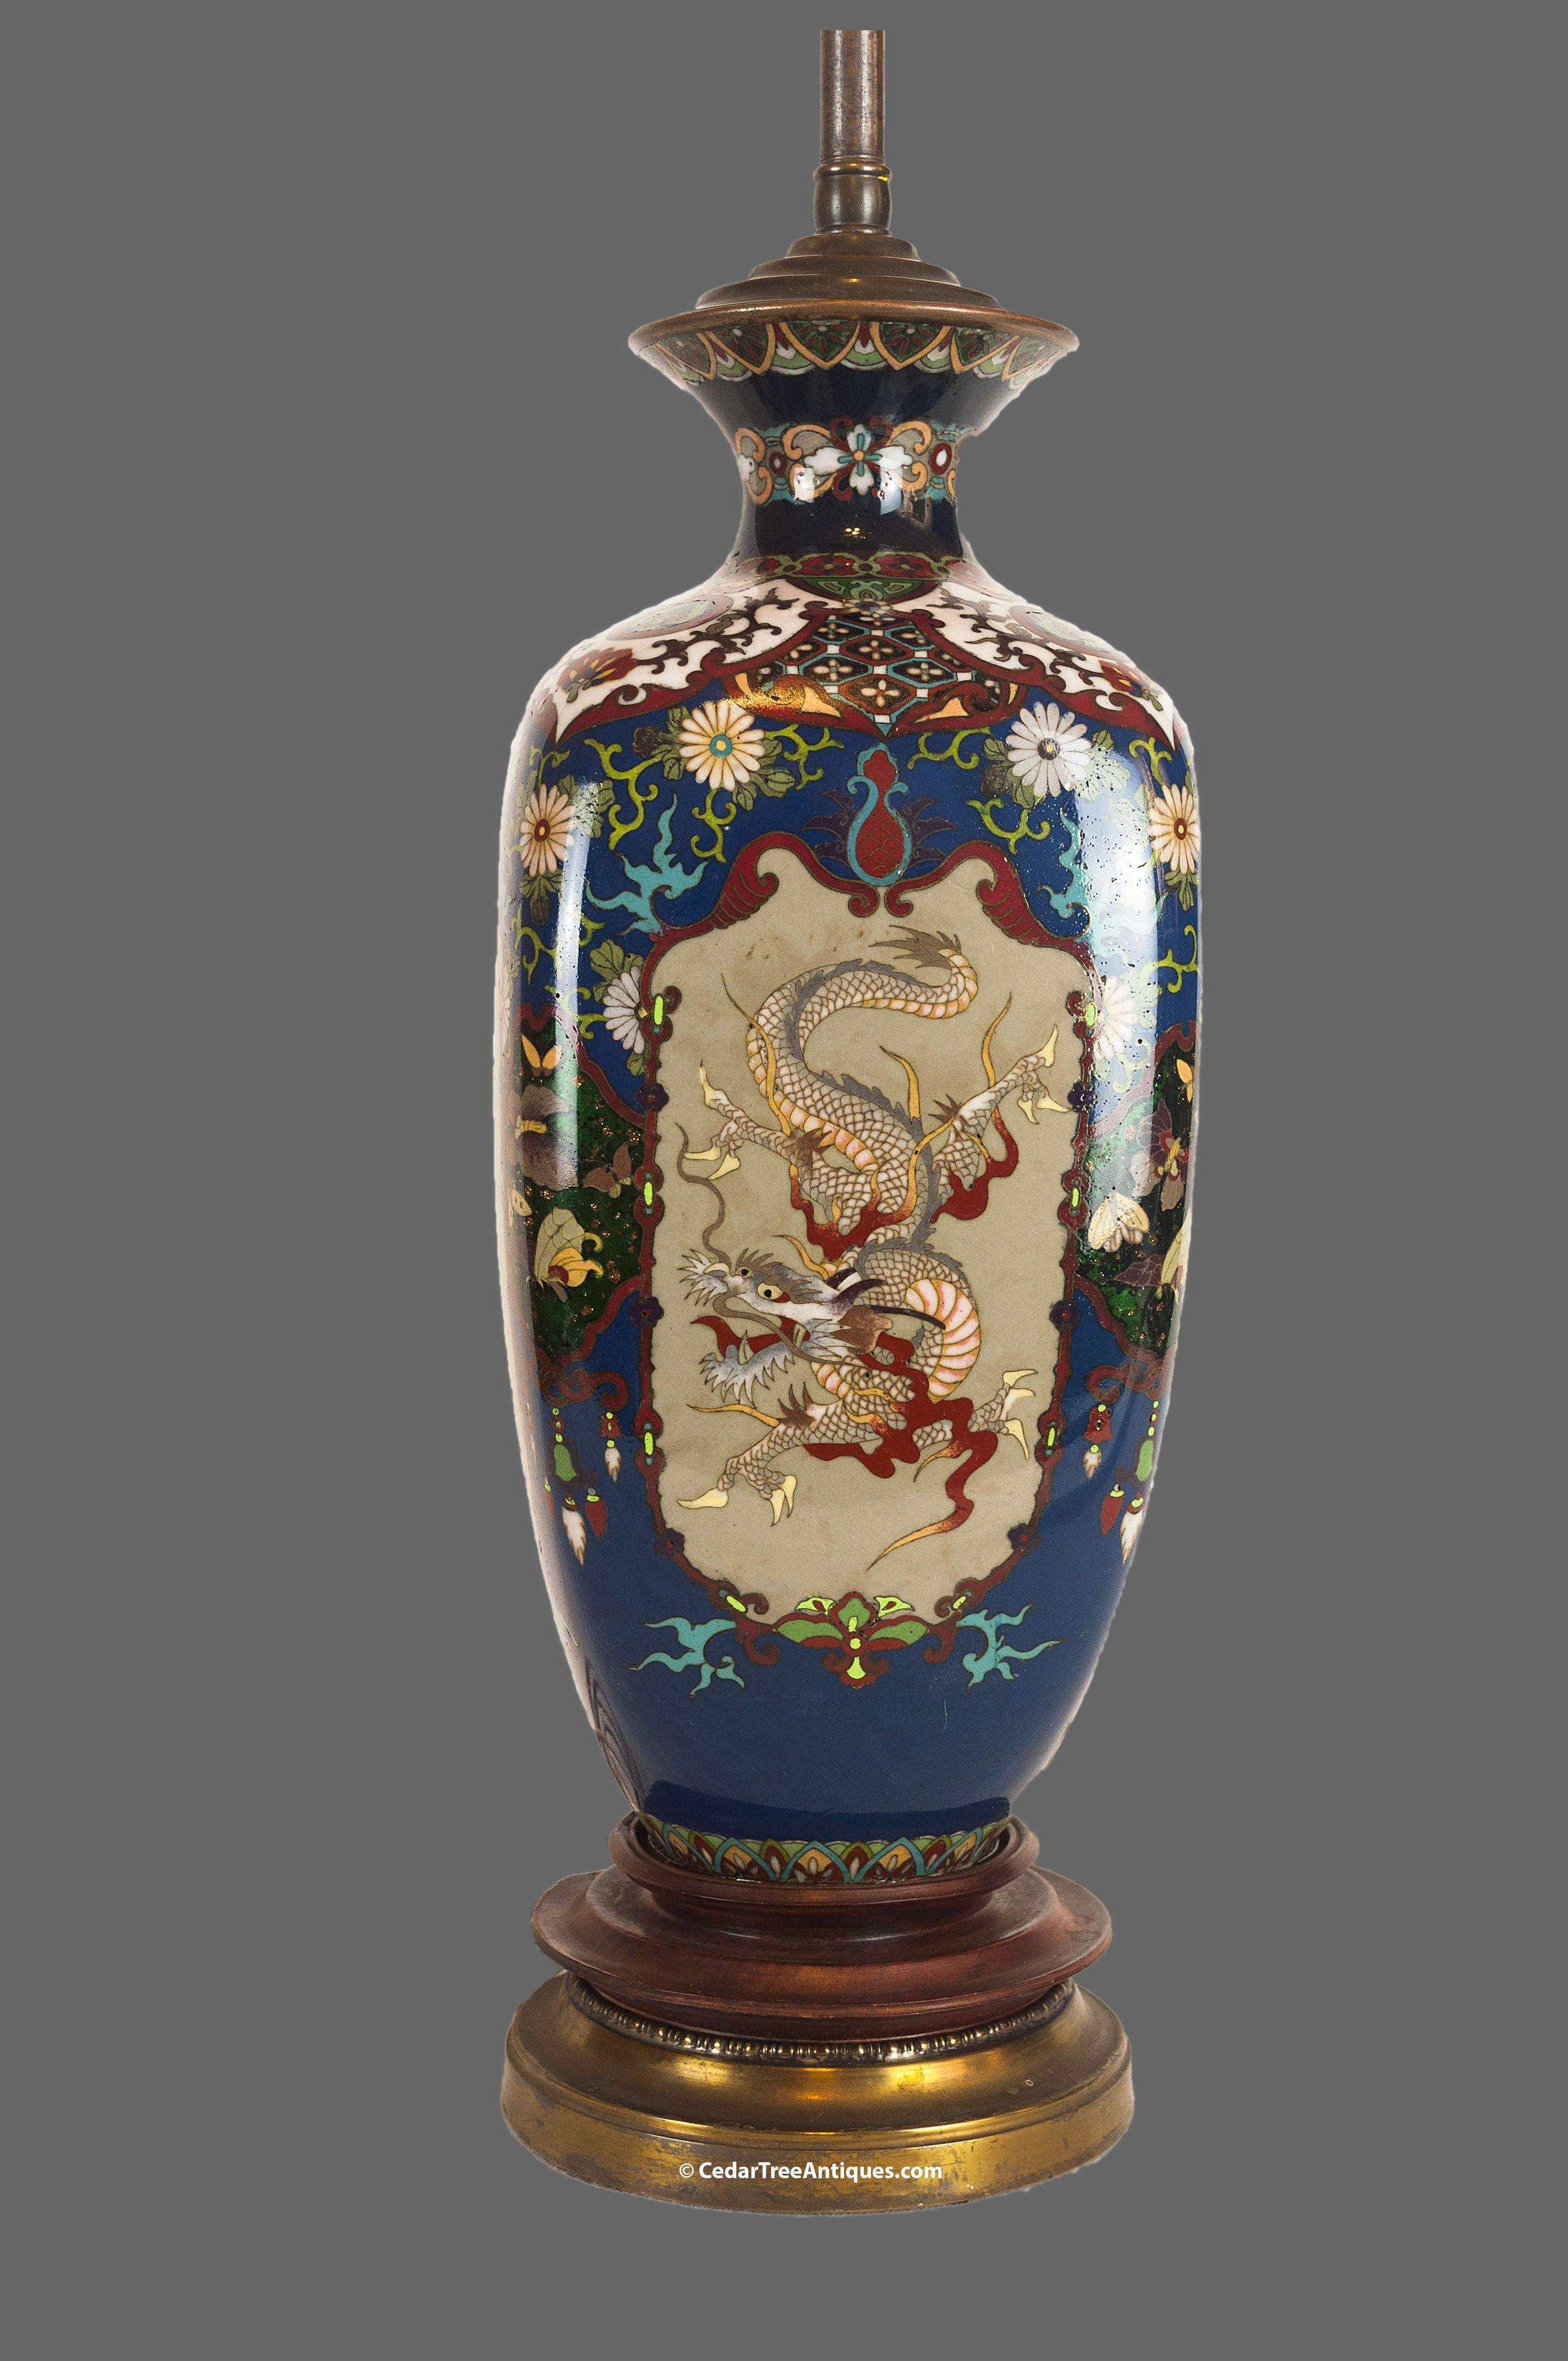 modern japanese vase of large japanese meiji period cloisonne vase with multi panel multi within large japanese meiji period cloisonne vase with multi panel multi color dragon and phoenix motifs mounted as a lamp